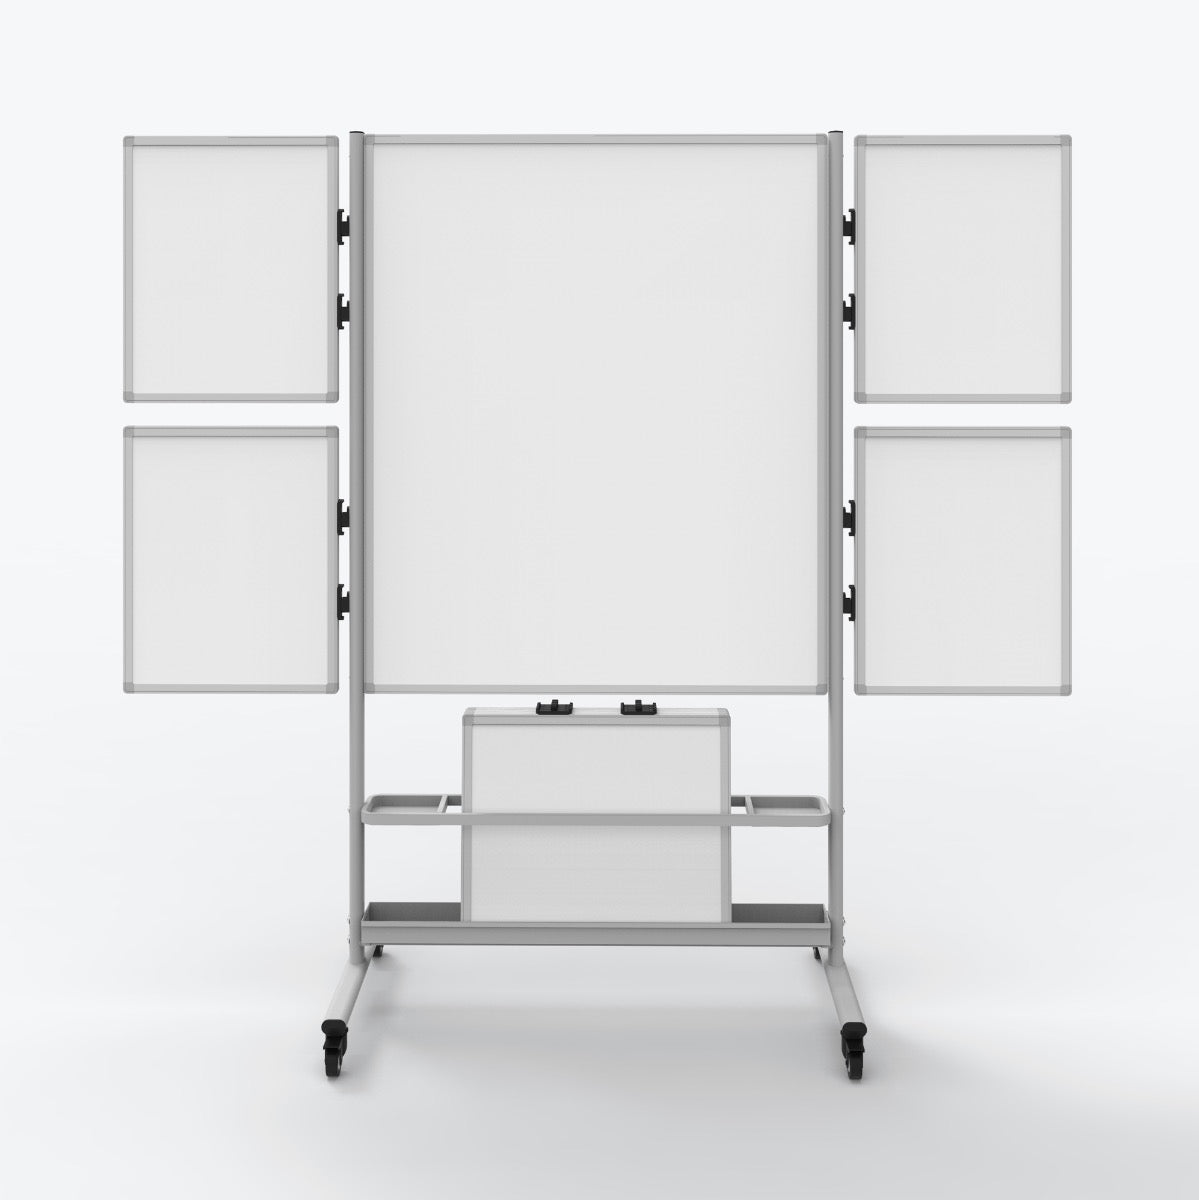 Luxor Mobile Collaboration Station Whiteboard w/ 4 Small Attachable Boards 82.25"W x 23.7"D x 76.4"H (White) - COLLAB-STATION